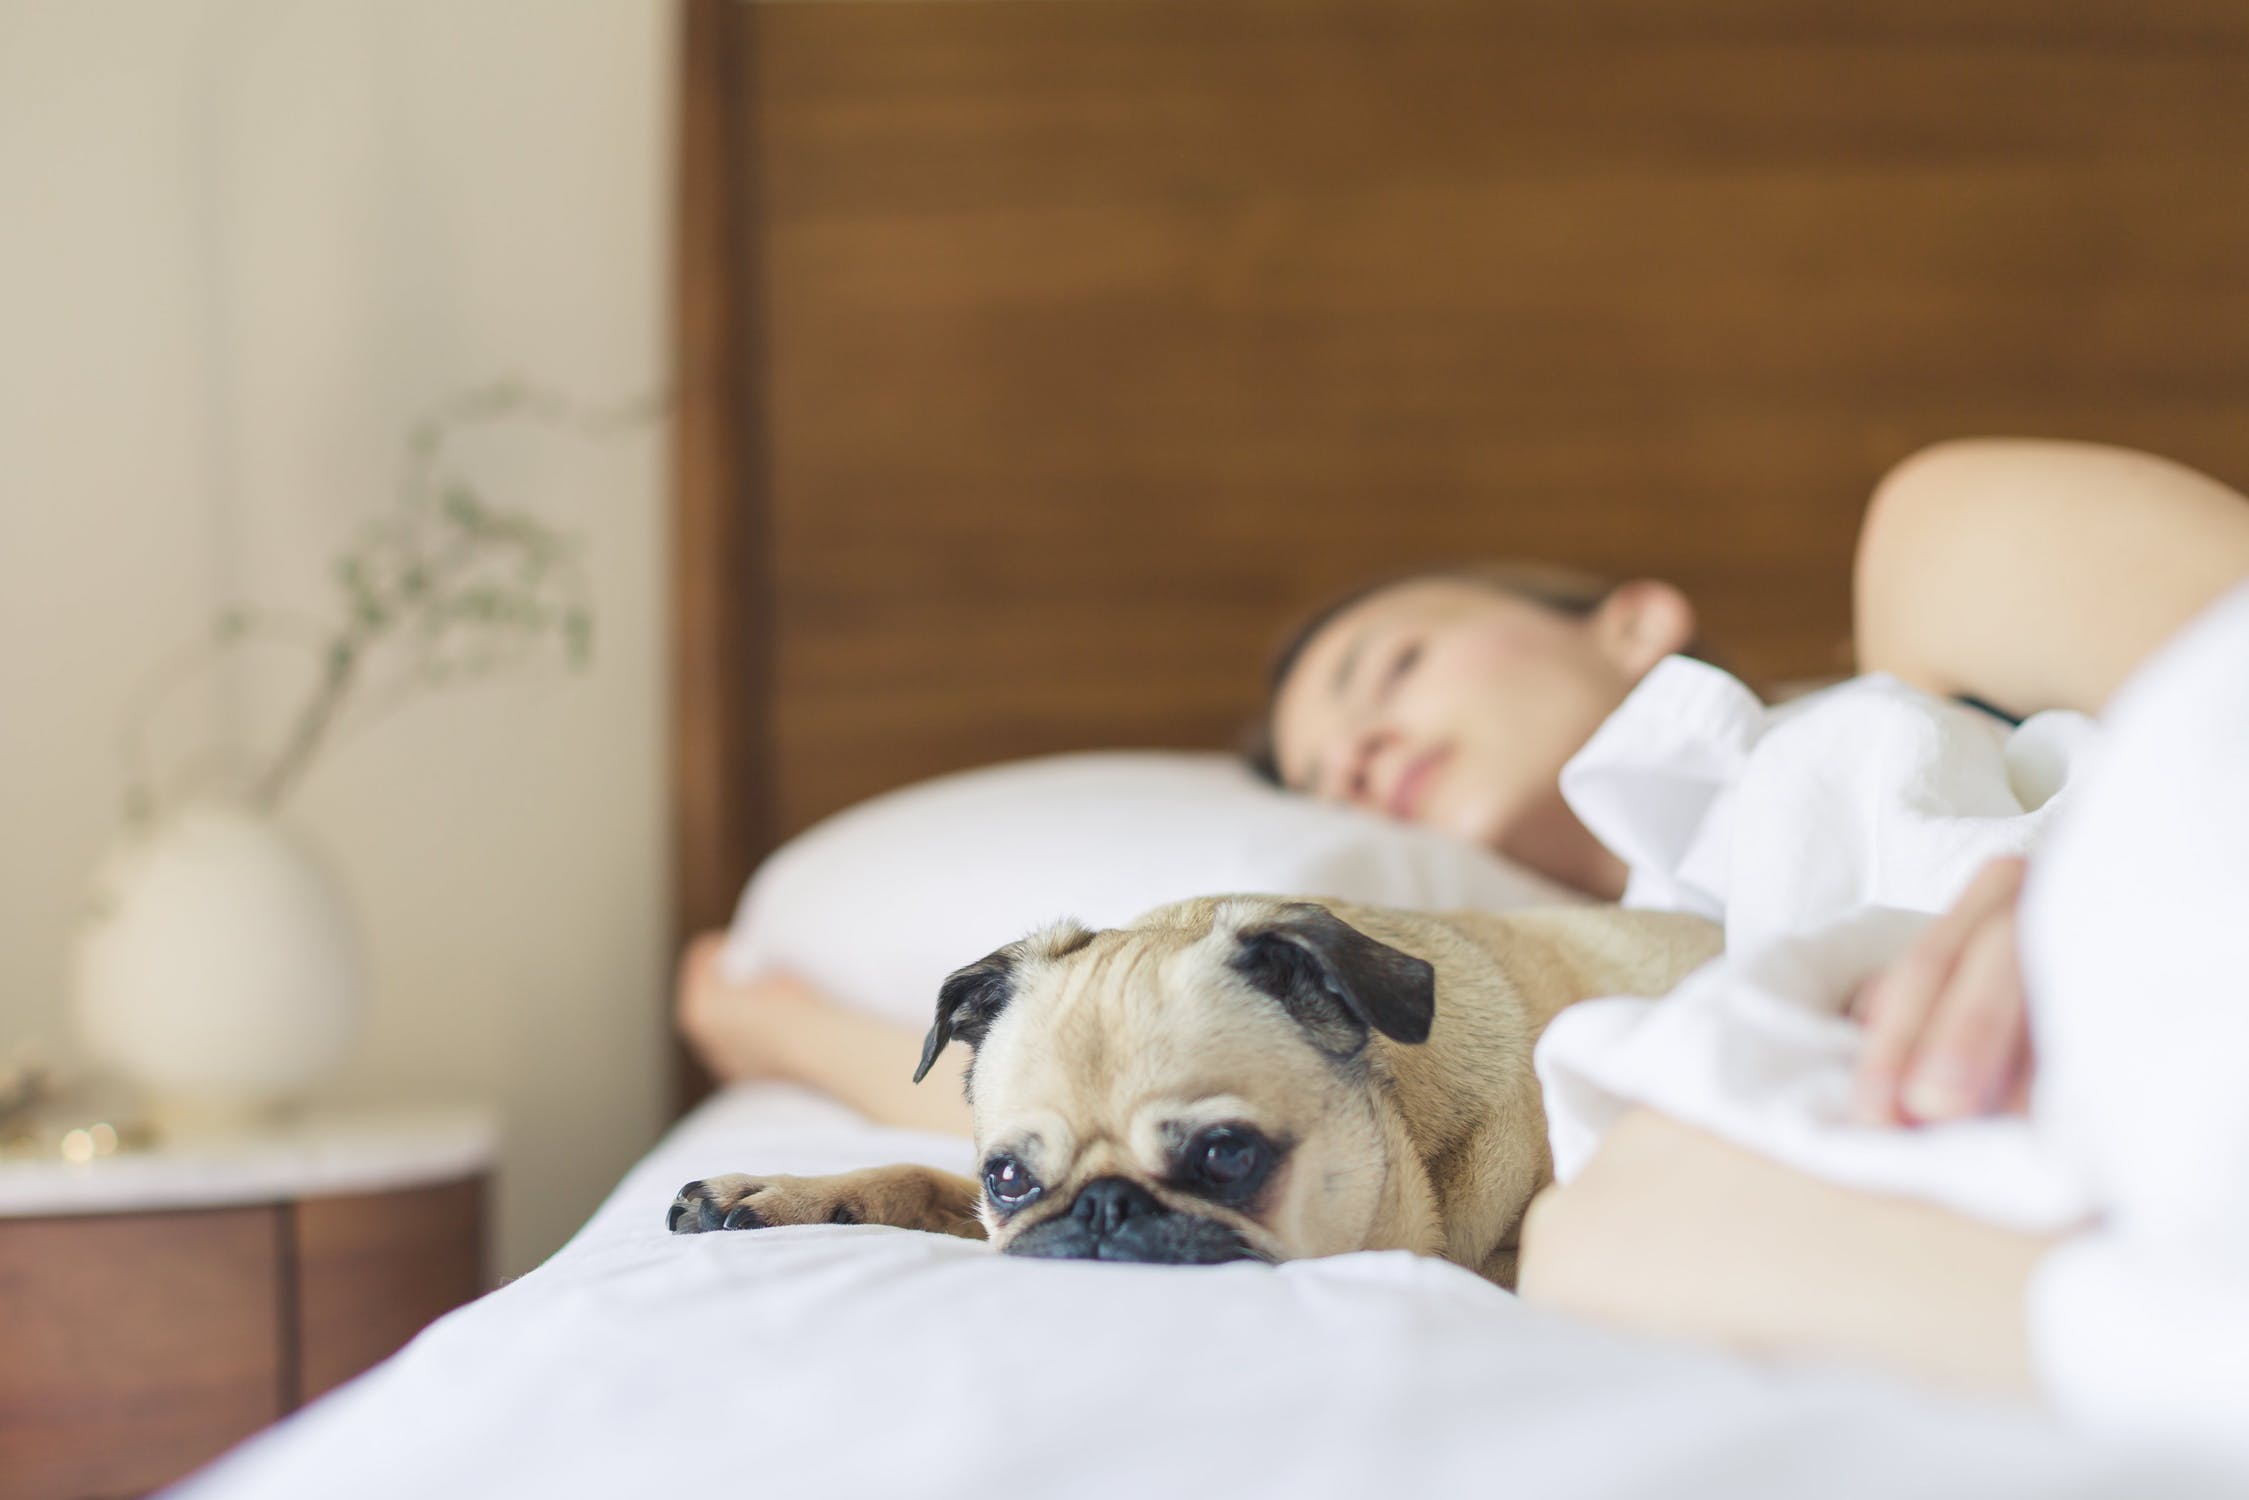 6 ways mattress can affect your sleep and health